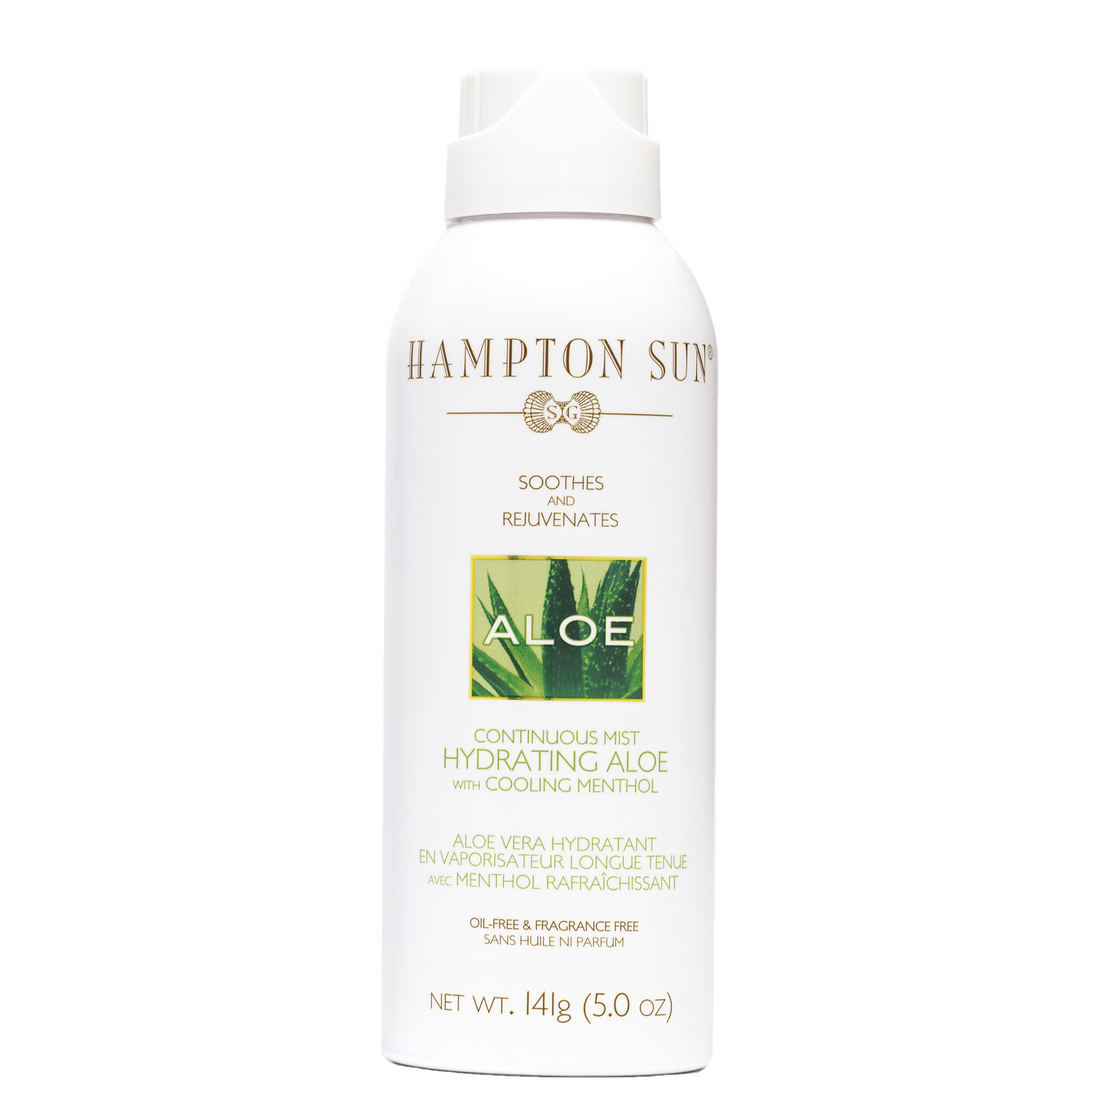 Hydrating Aloe Continuous Mist